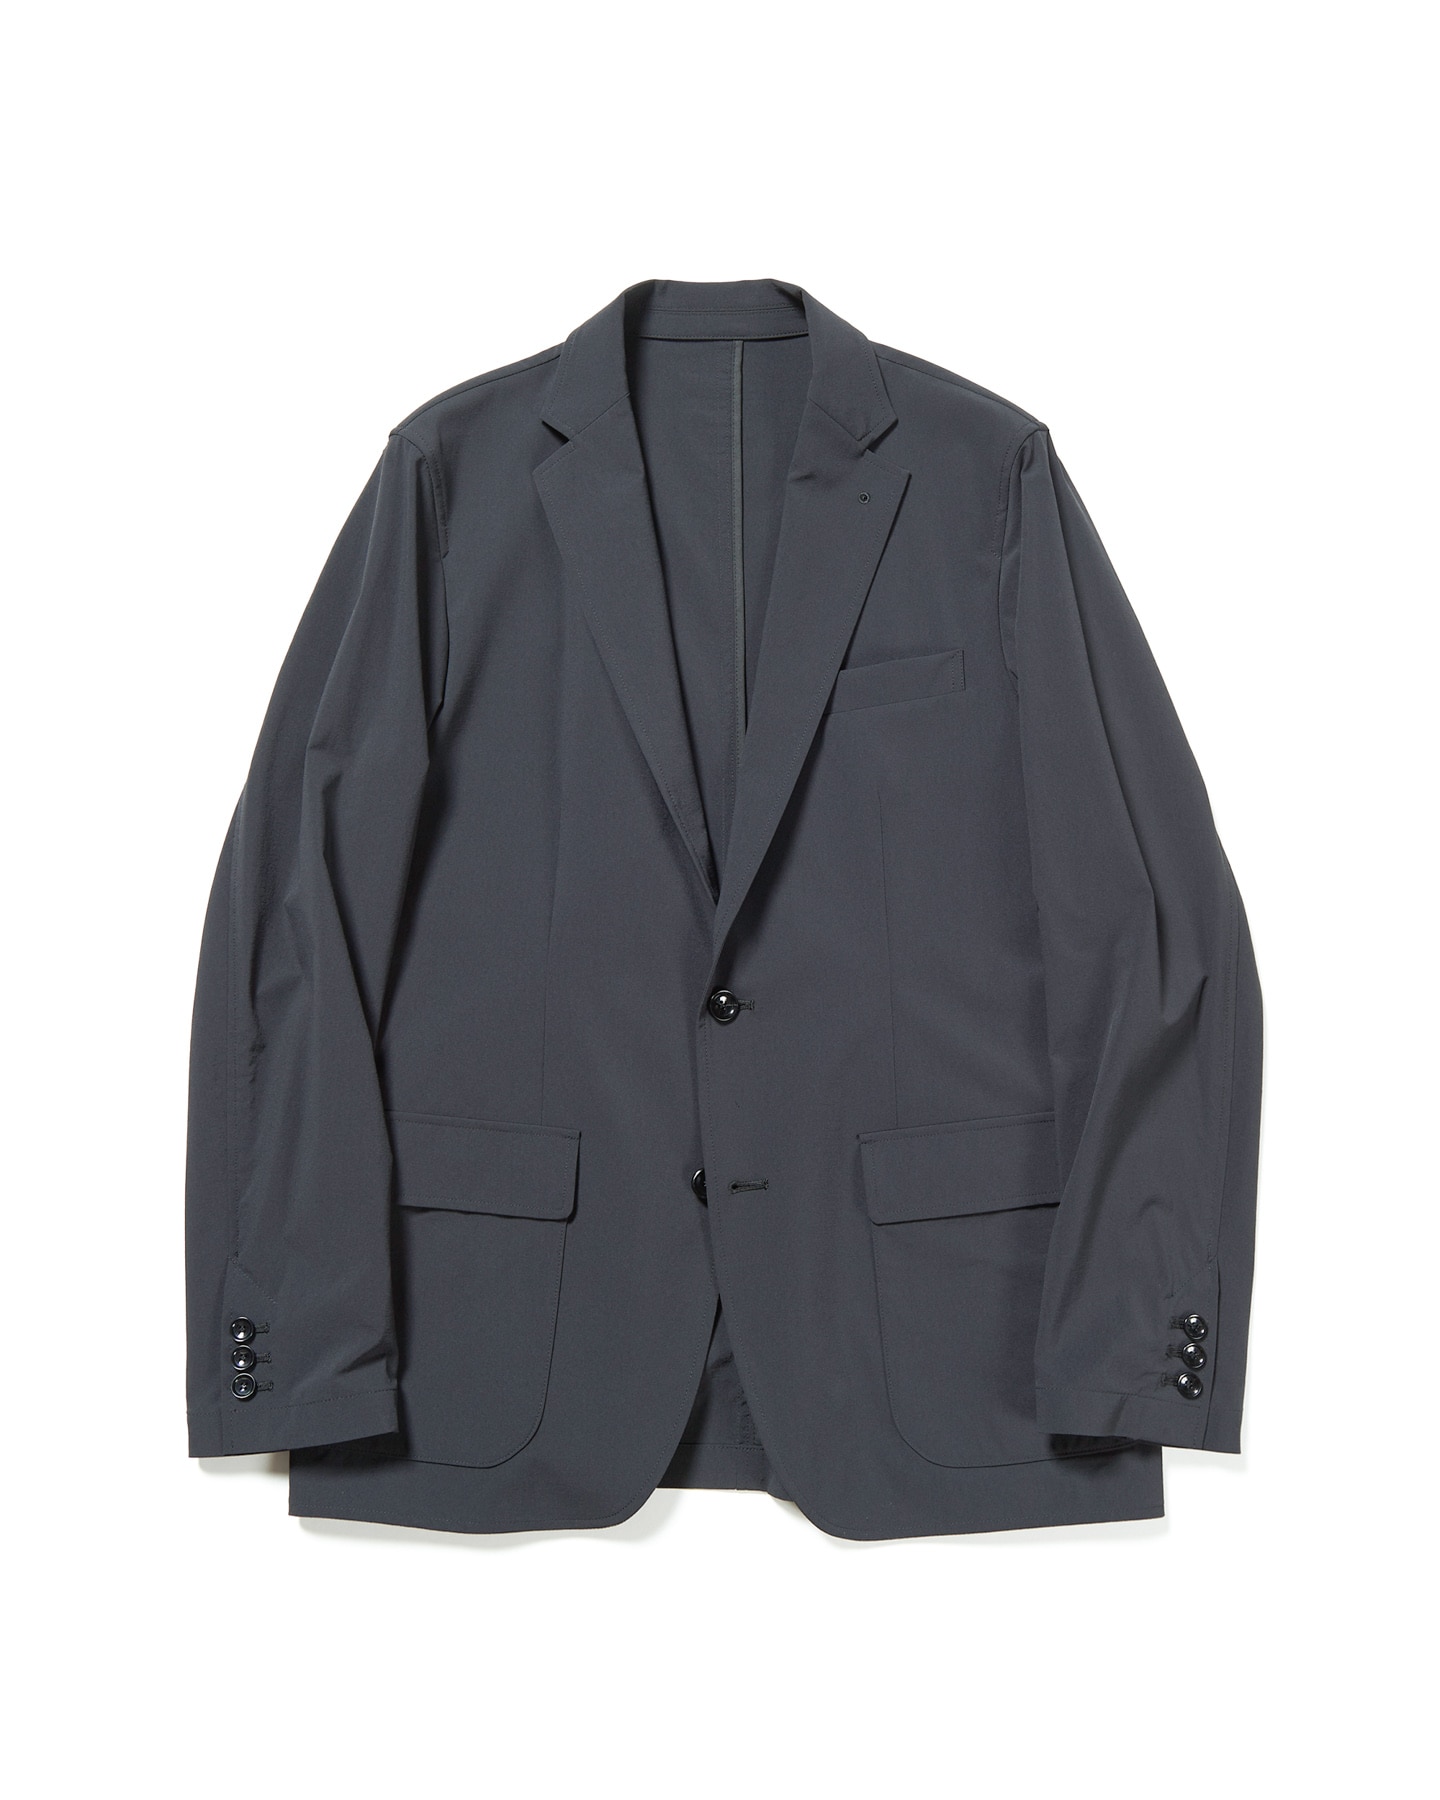 SOPH. | 2WAY STRETCH PACKABLE 2BUTTON JACKET(M BLACK):